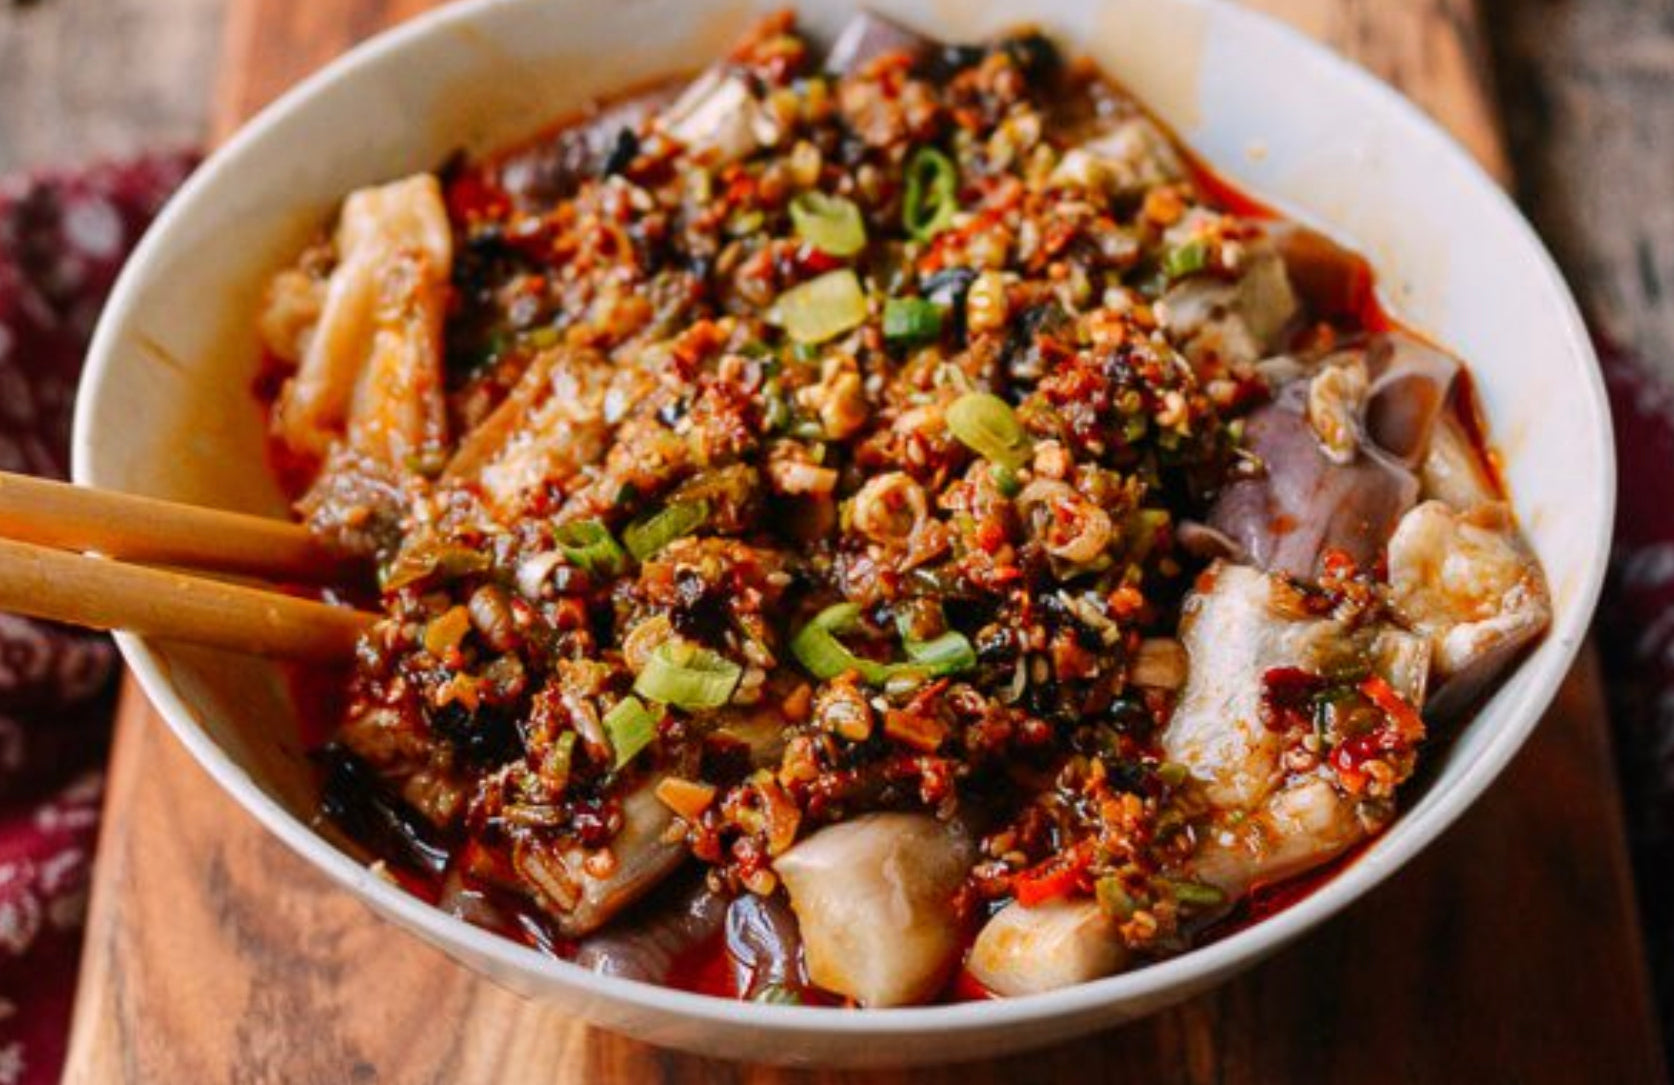 Steamed Eggplant In Hunan Chili Sauce